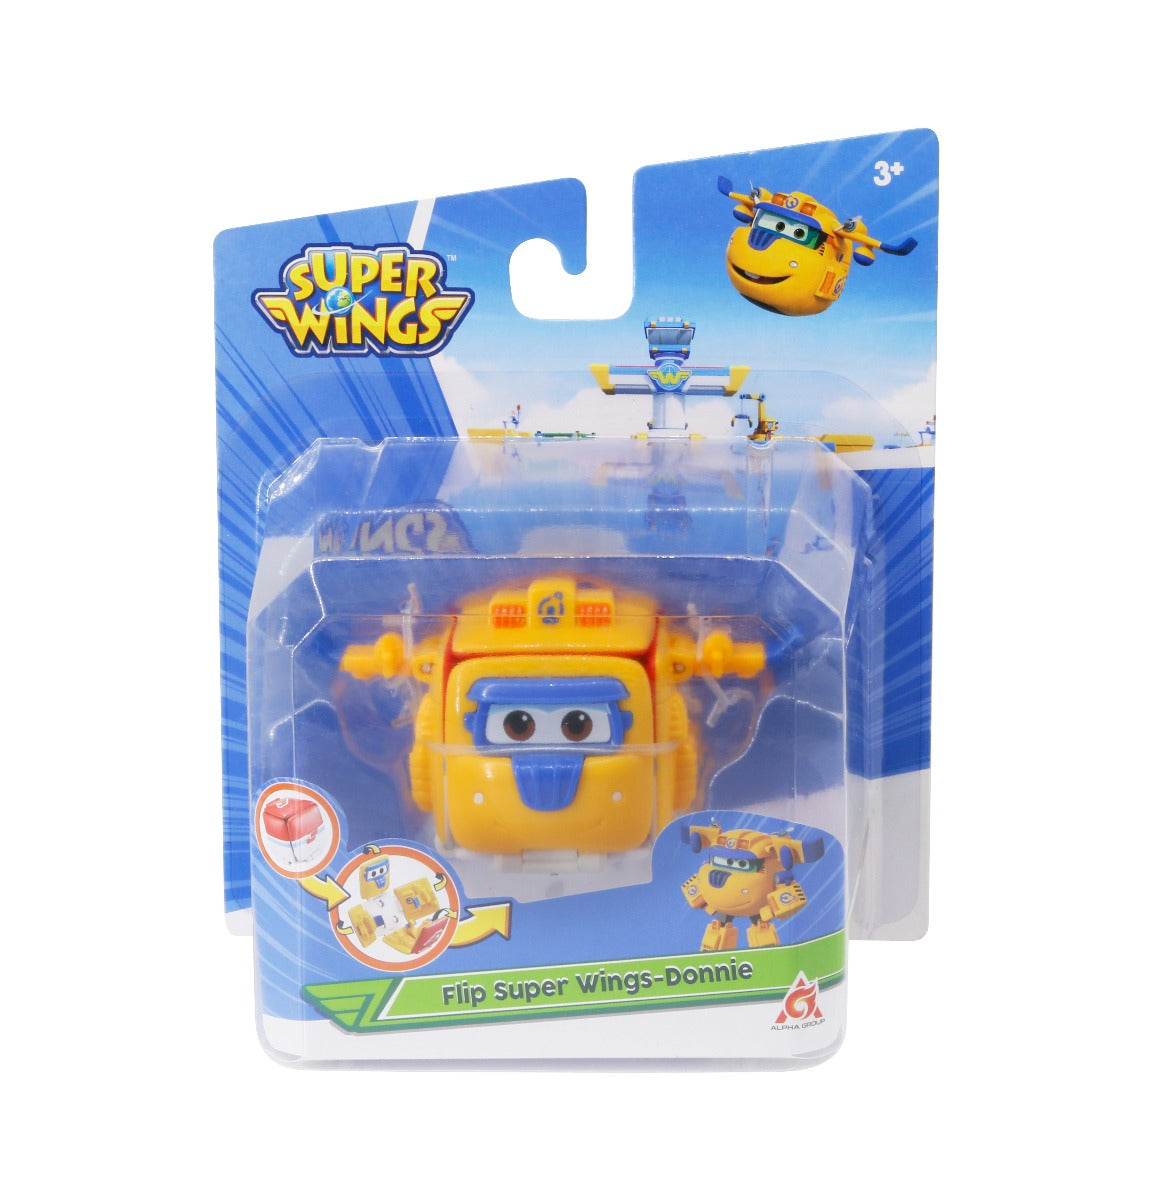 Super wings transformation box - Donnie builds SUPERWINGS YW740572